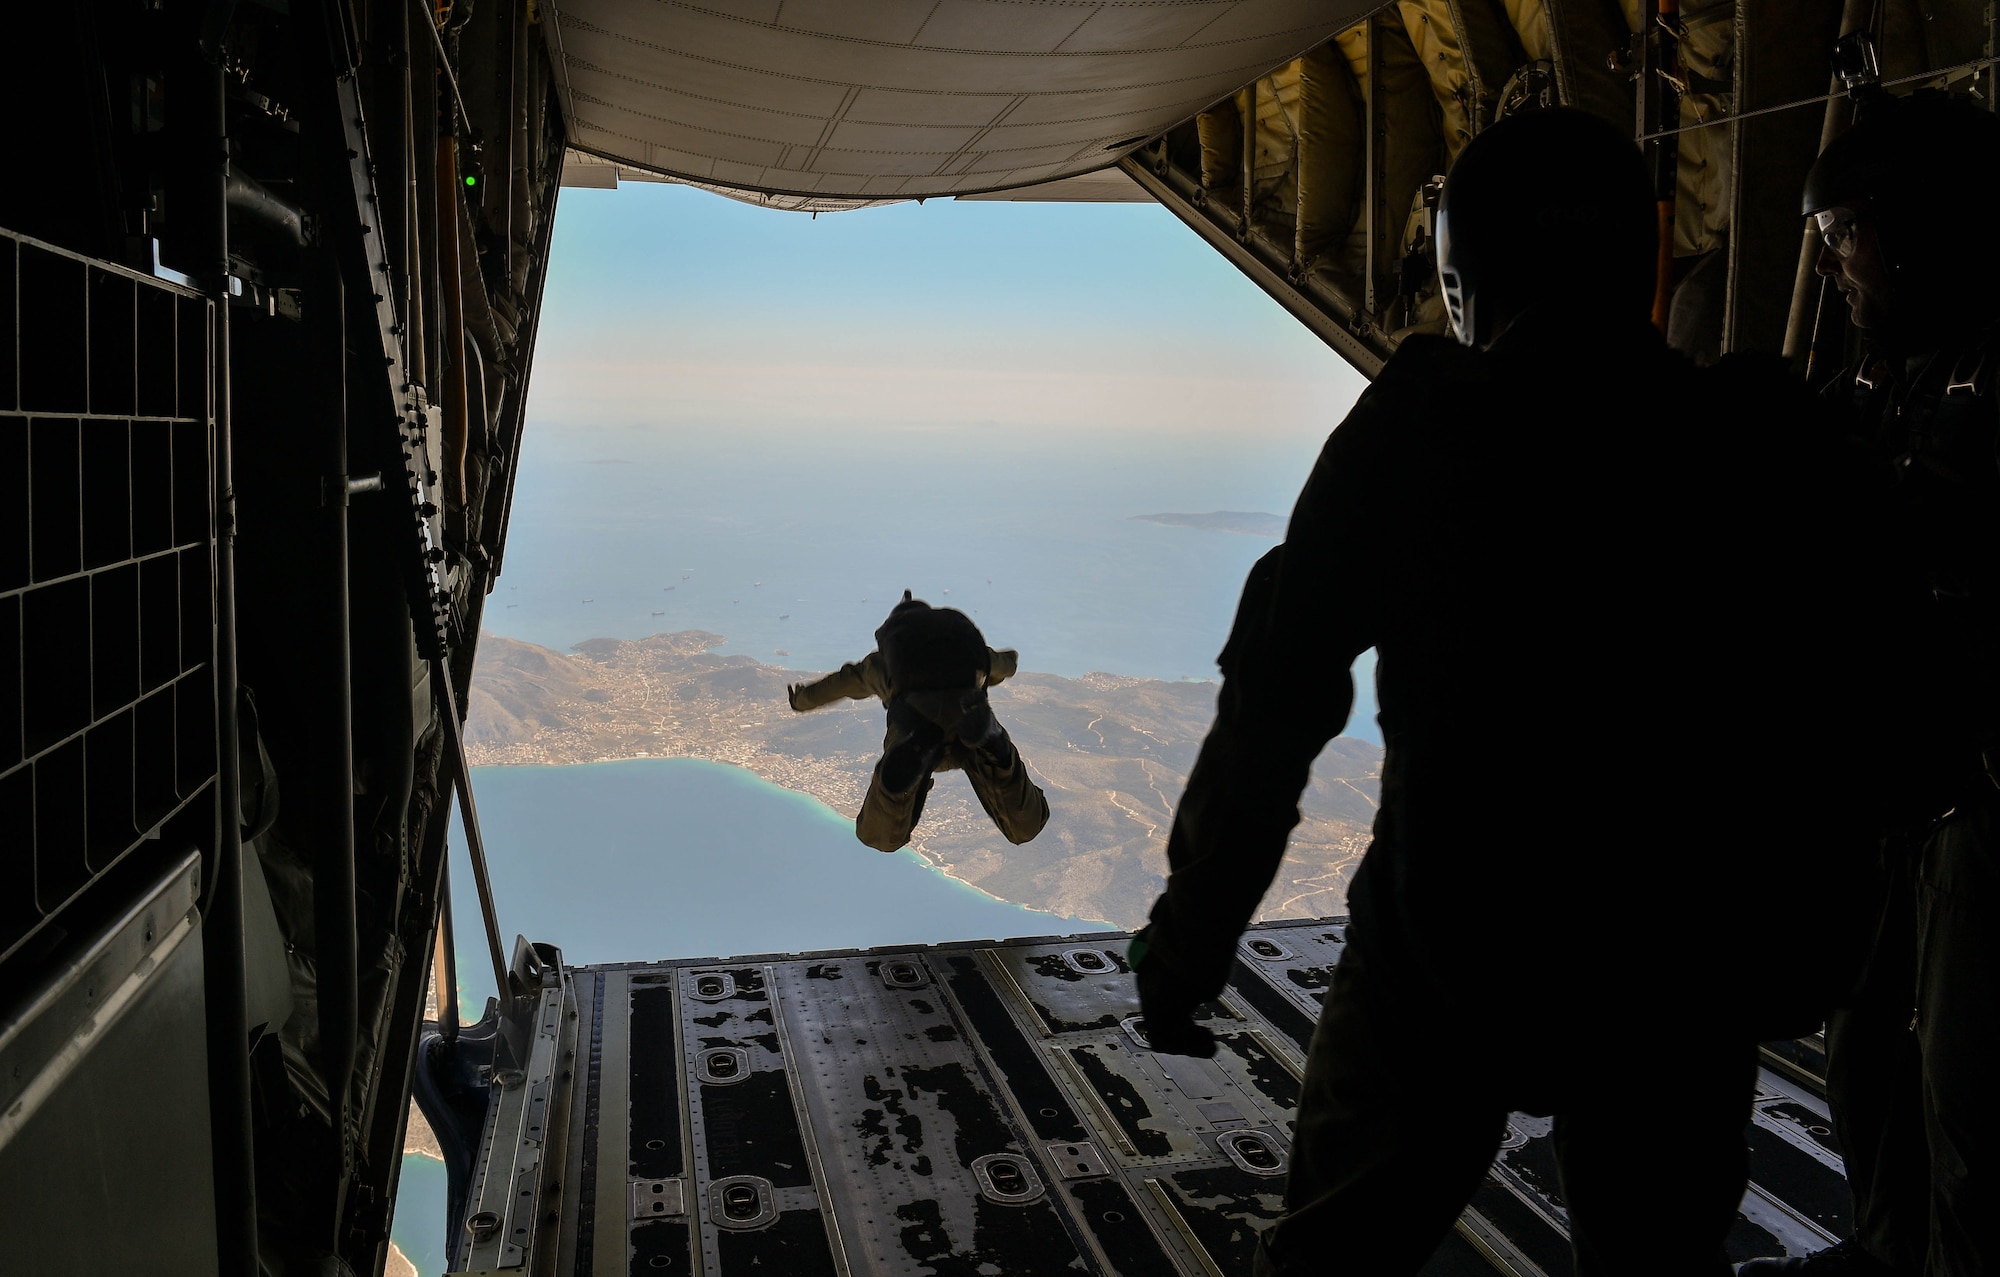 A Greek paratrooper conducts a military free-fall jump from a U.S. Air Force C-130J Super Hercules during Exercise Stolen Cerberus IV above Megara, Greece, April 27, 2017. U.S. Air Force and Army service members trained alongside the Hellenic air force in personnel and cargo drops during the fourth iteration of the exercise in Greece. (U.S Air Force photo by Senior Airman Tryphena Mayhugh)